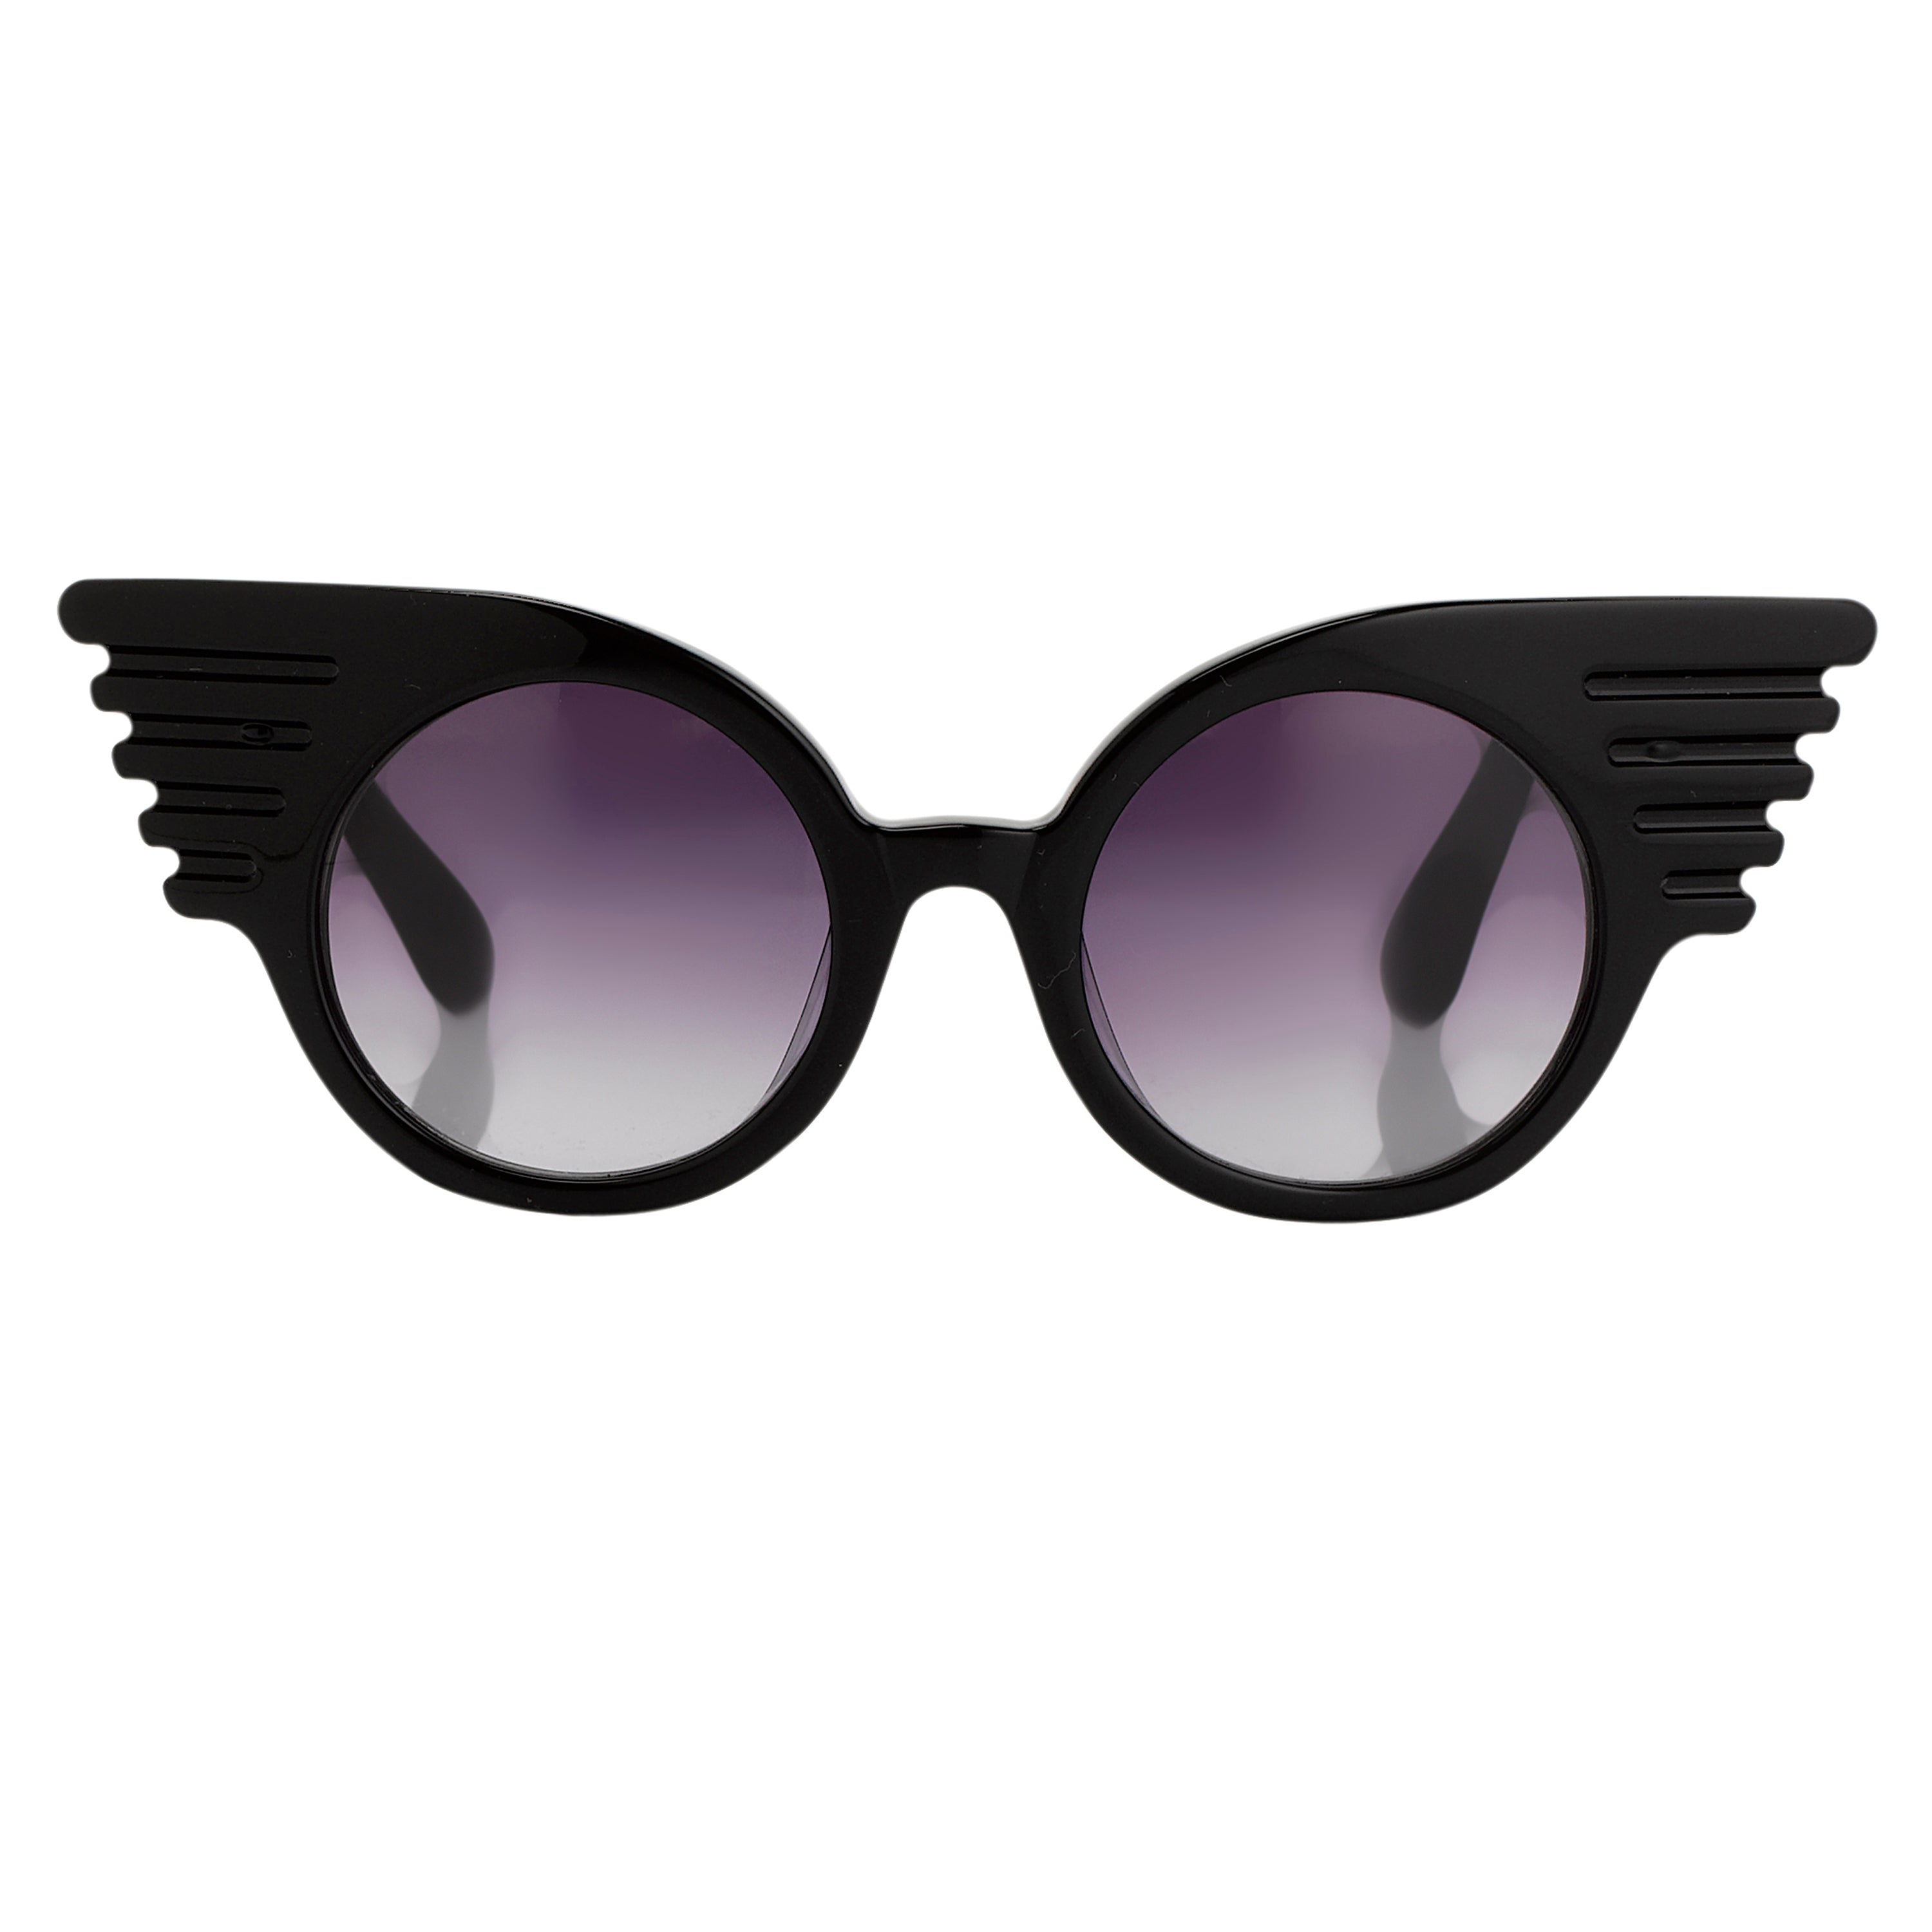 Jeremy Scott Sunglasses Special Wings Black and Grey